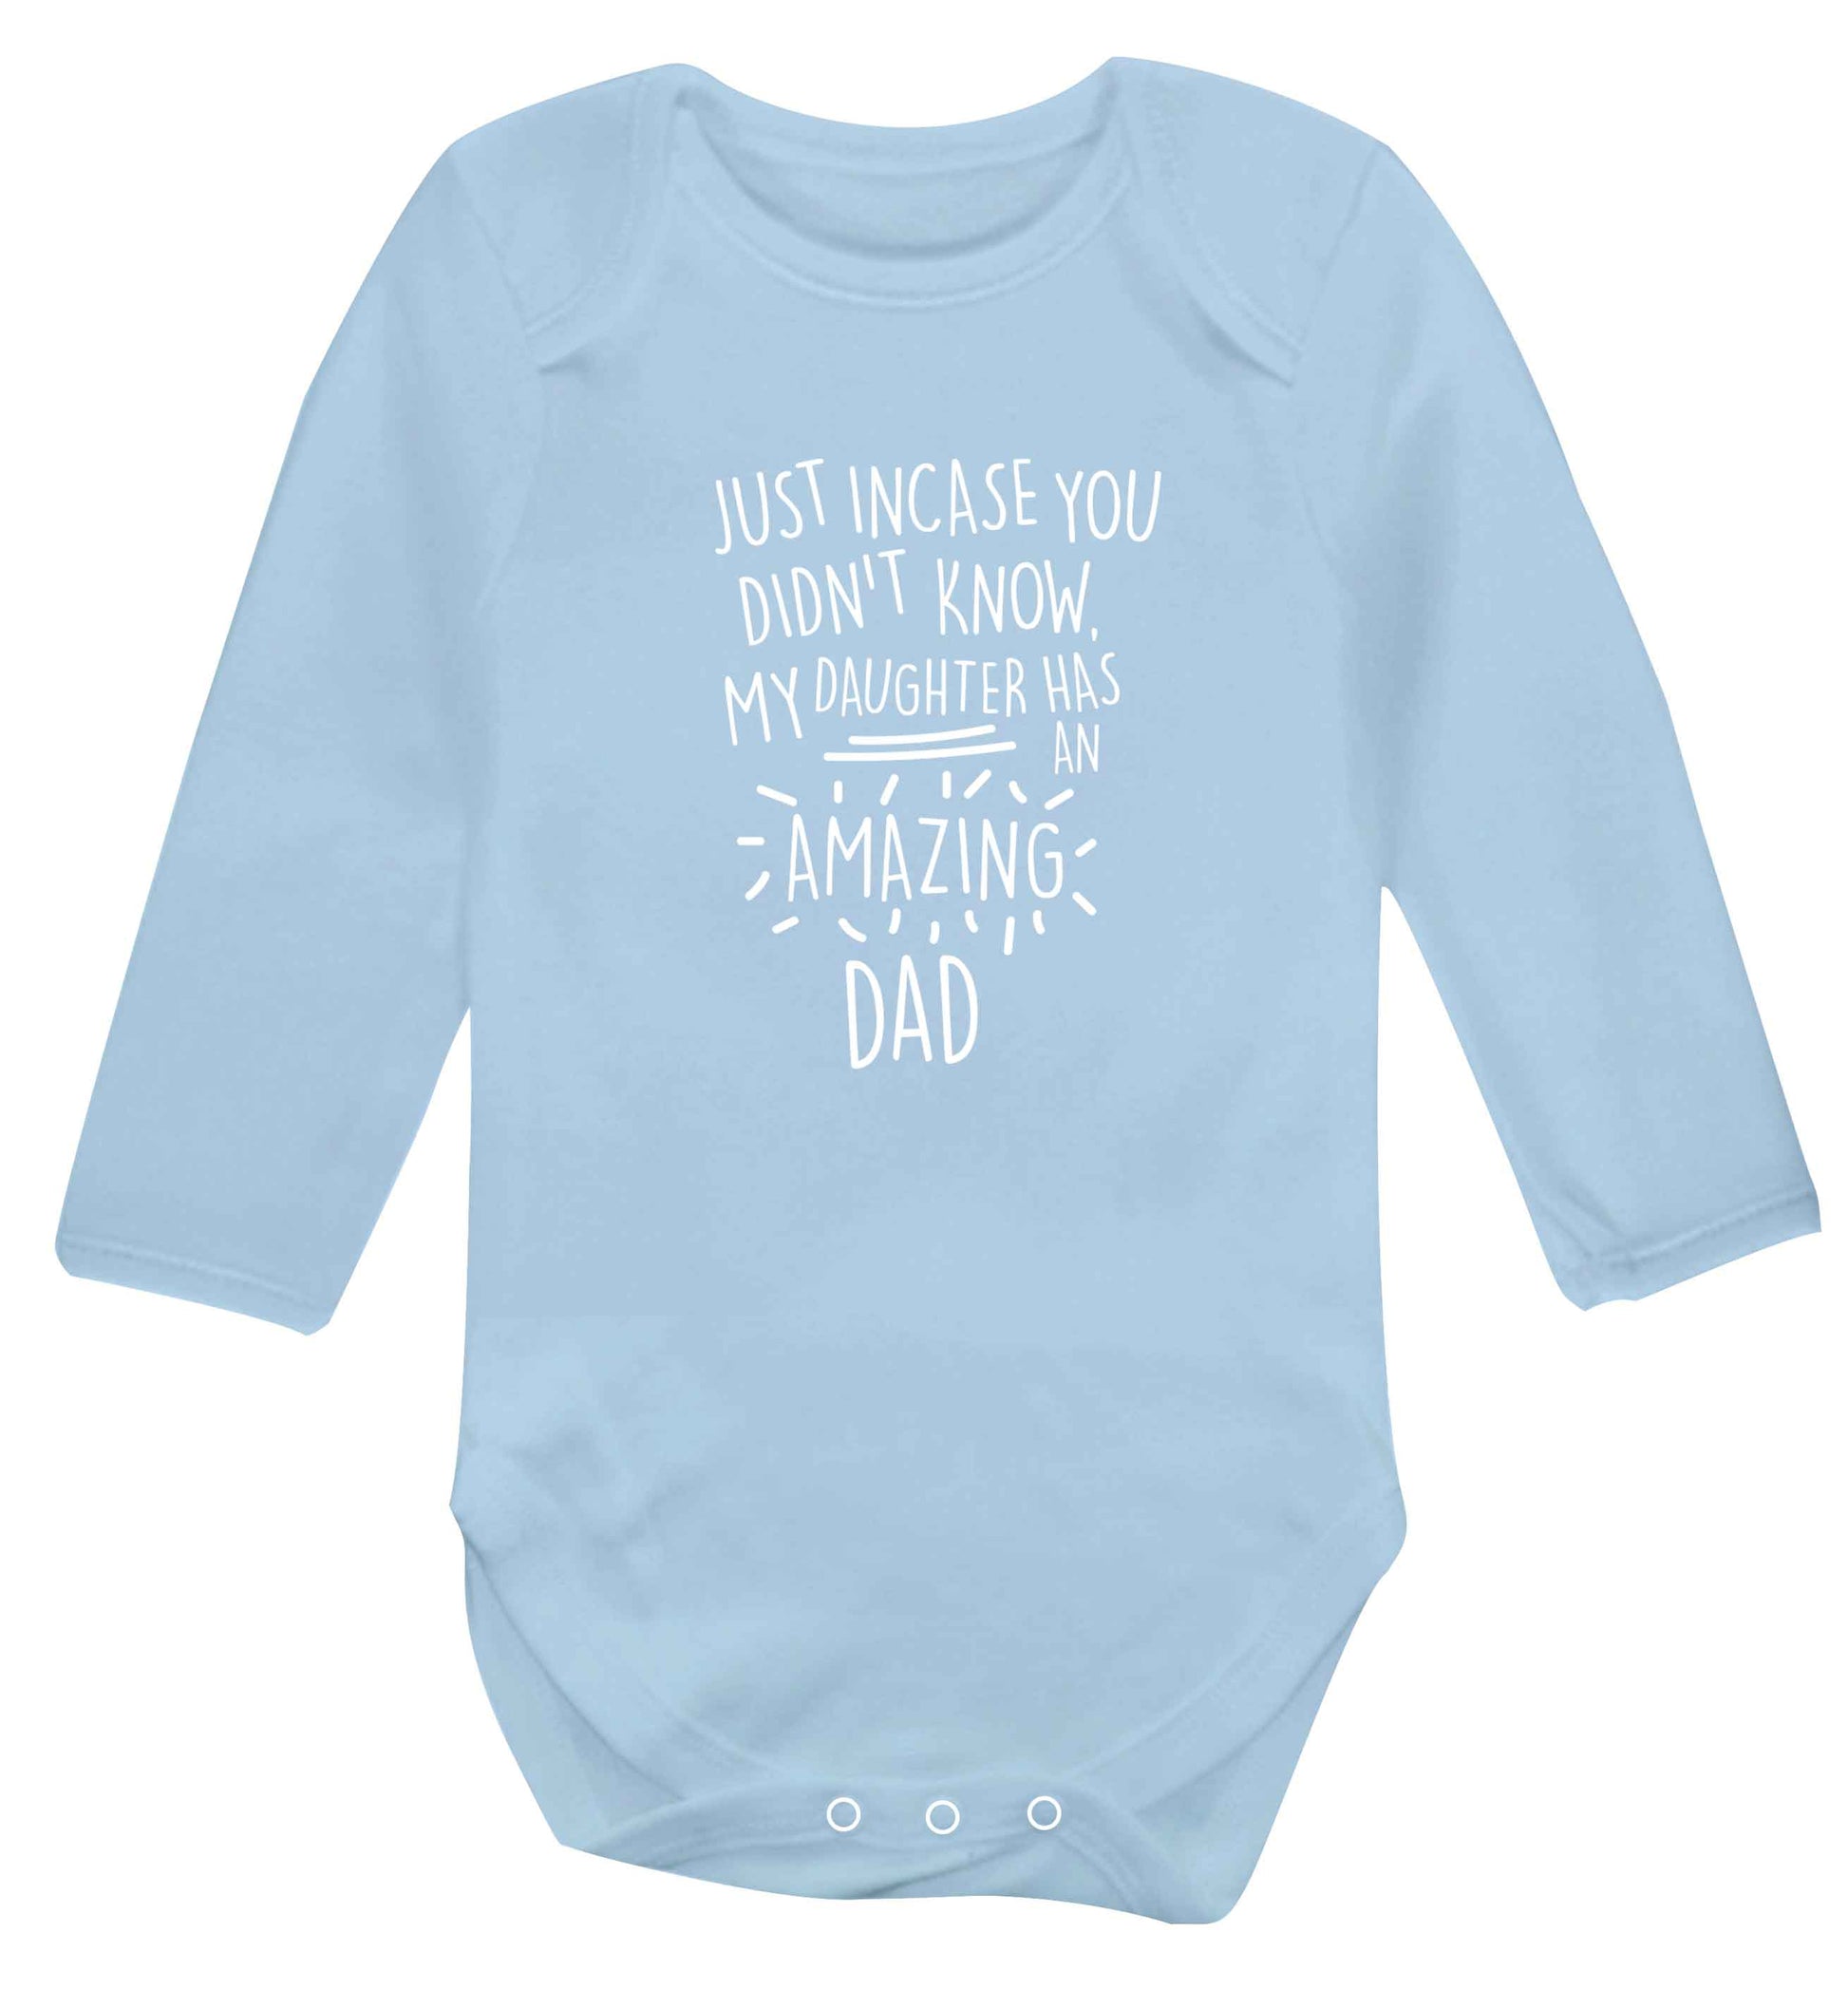 Just incase you didn't know my daughter has an amazing dad baby vest long sleeved pale blue 6-12 months